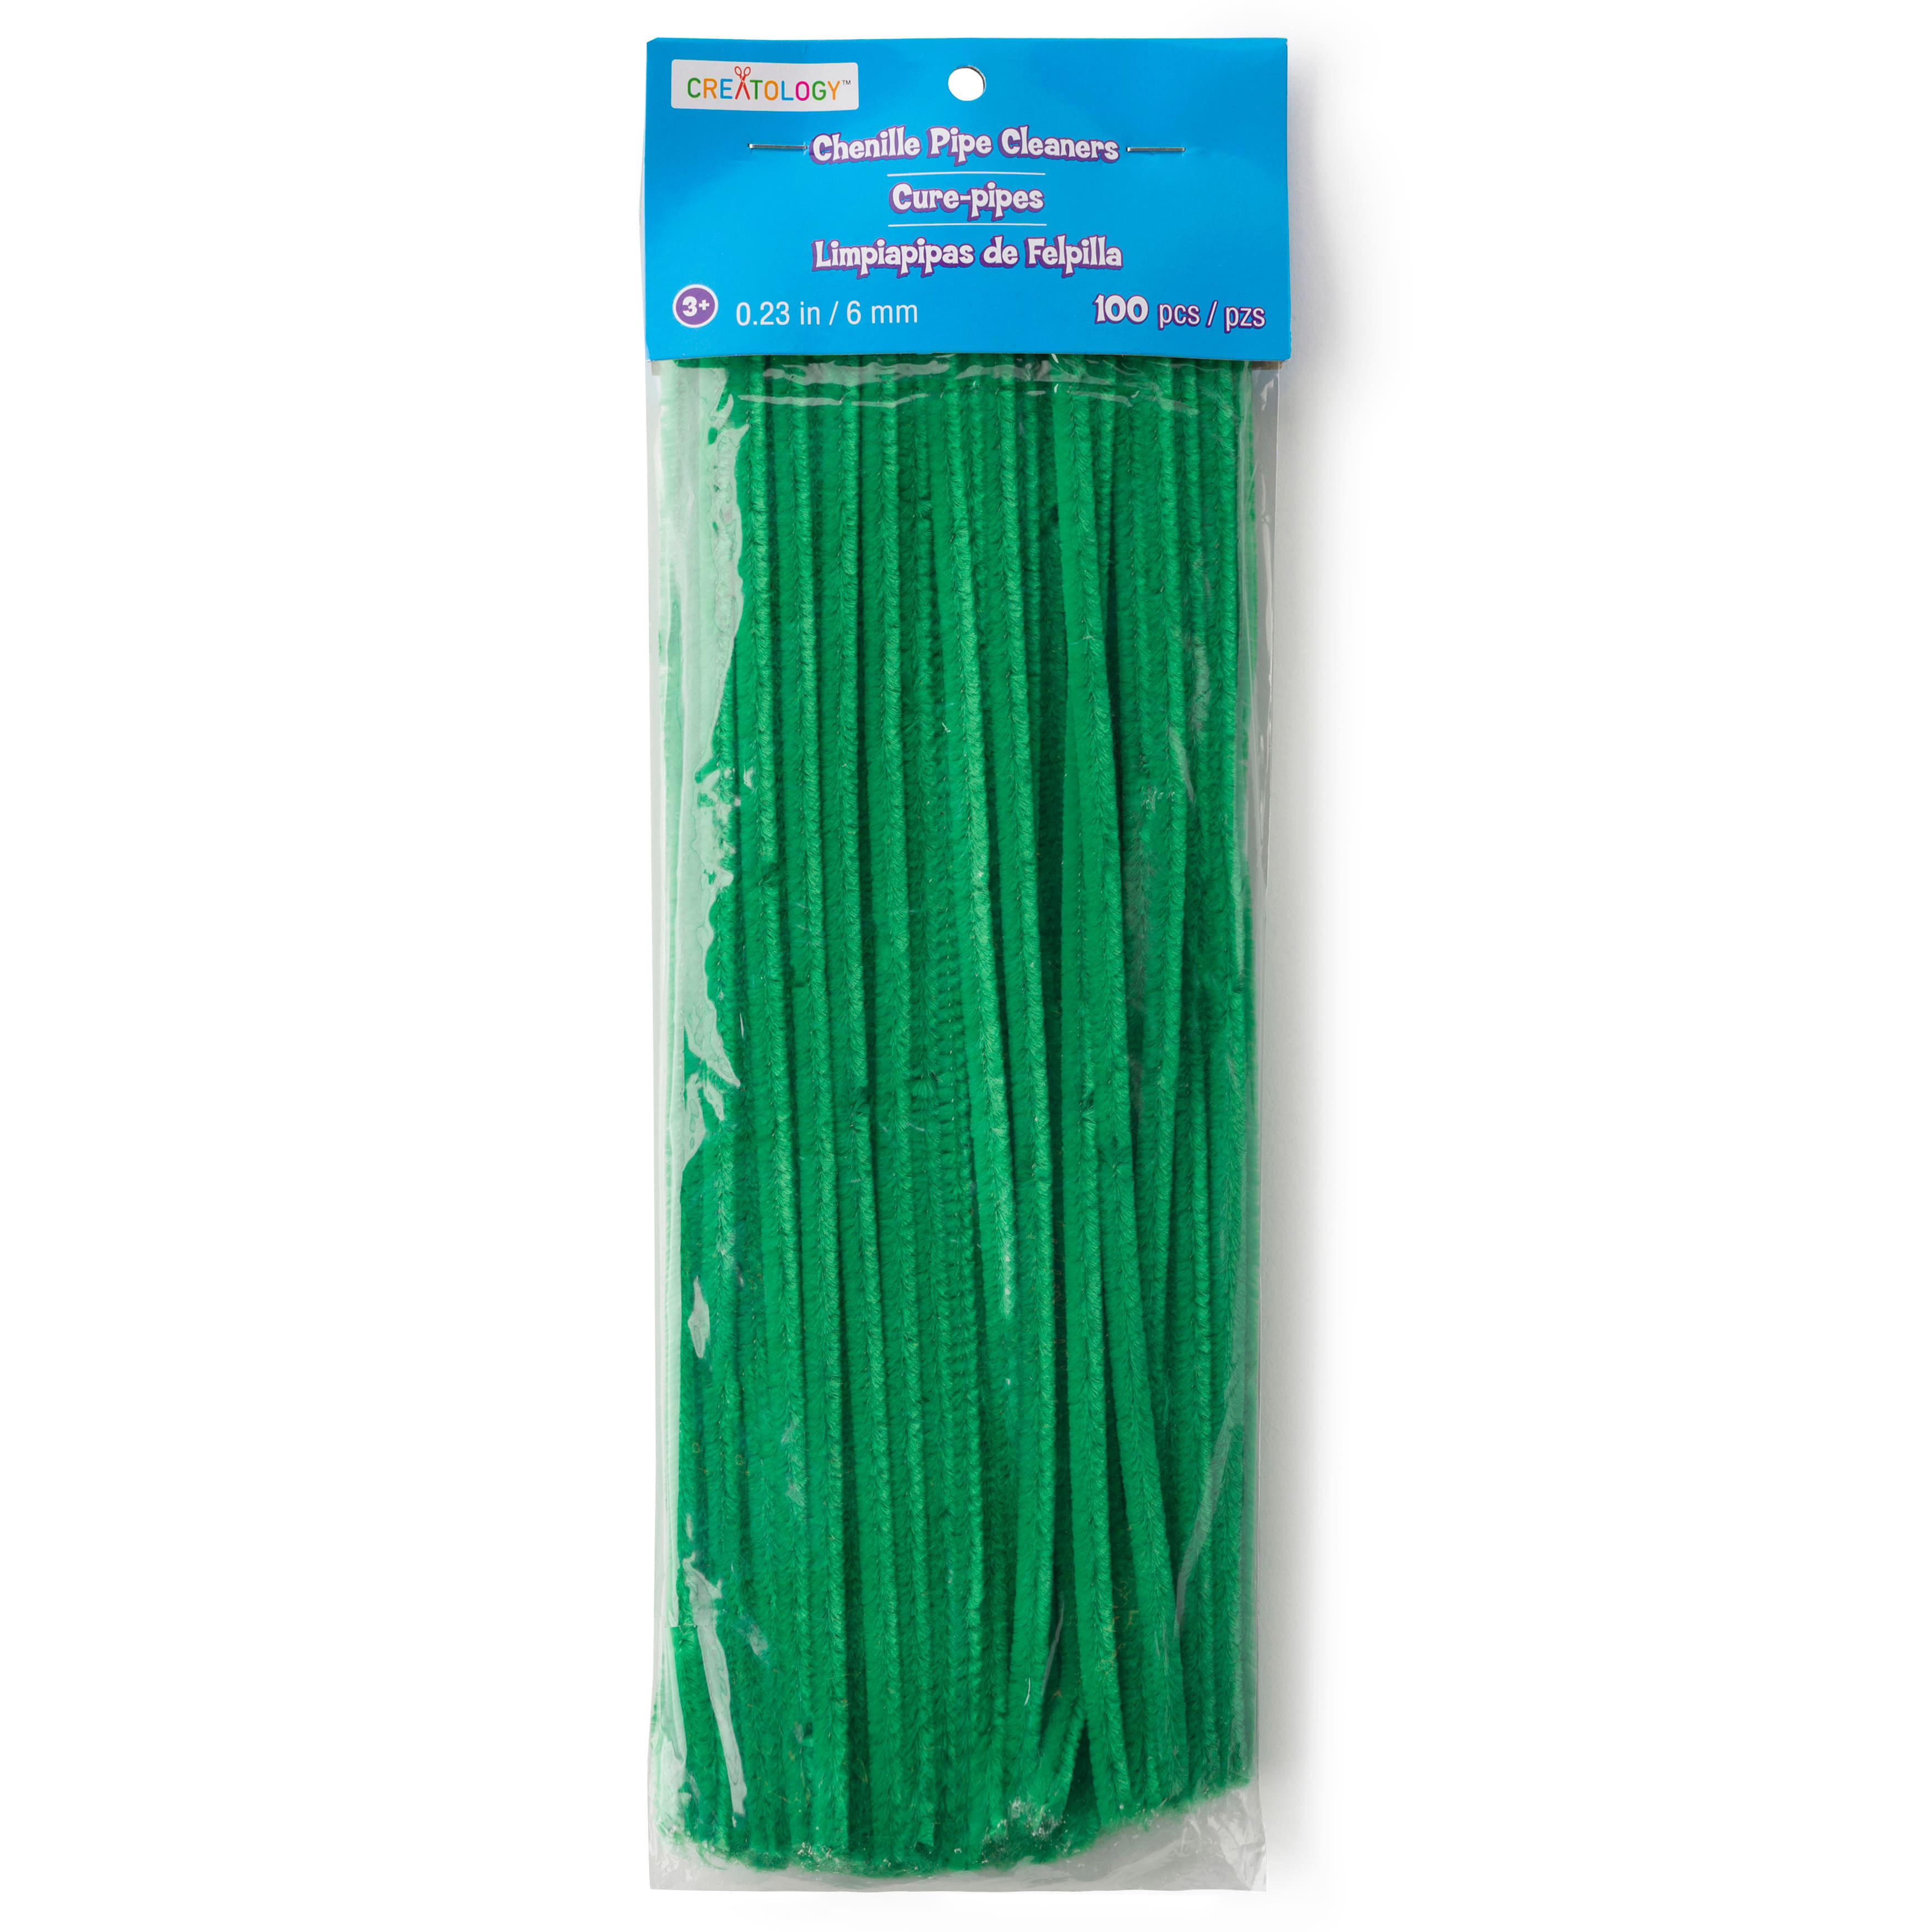 12 Packs: 100 ct. (1,200 total) Chenille Pipe Cleaners by Creatology™